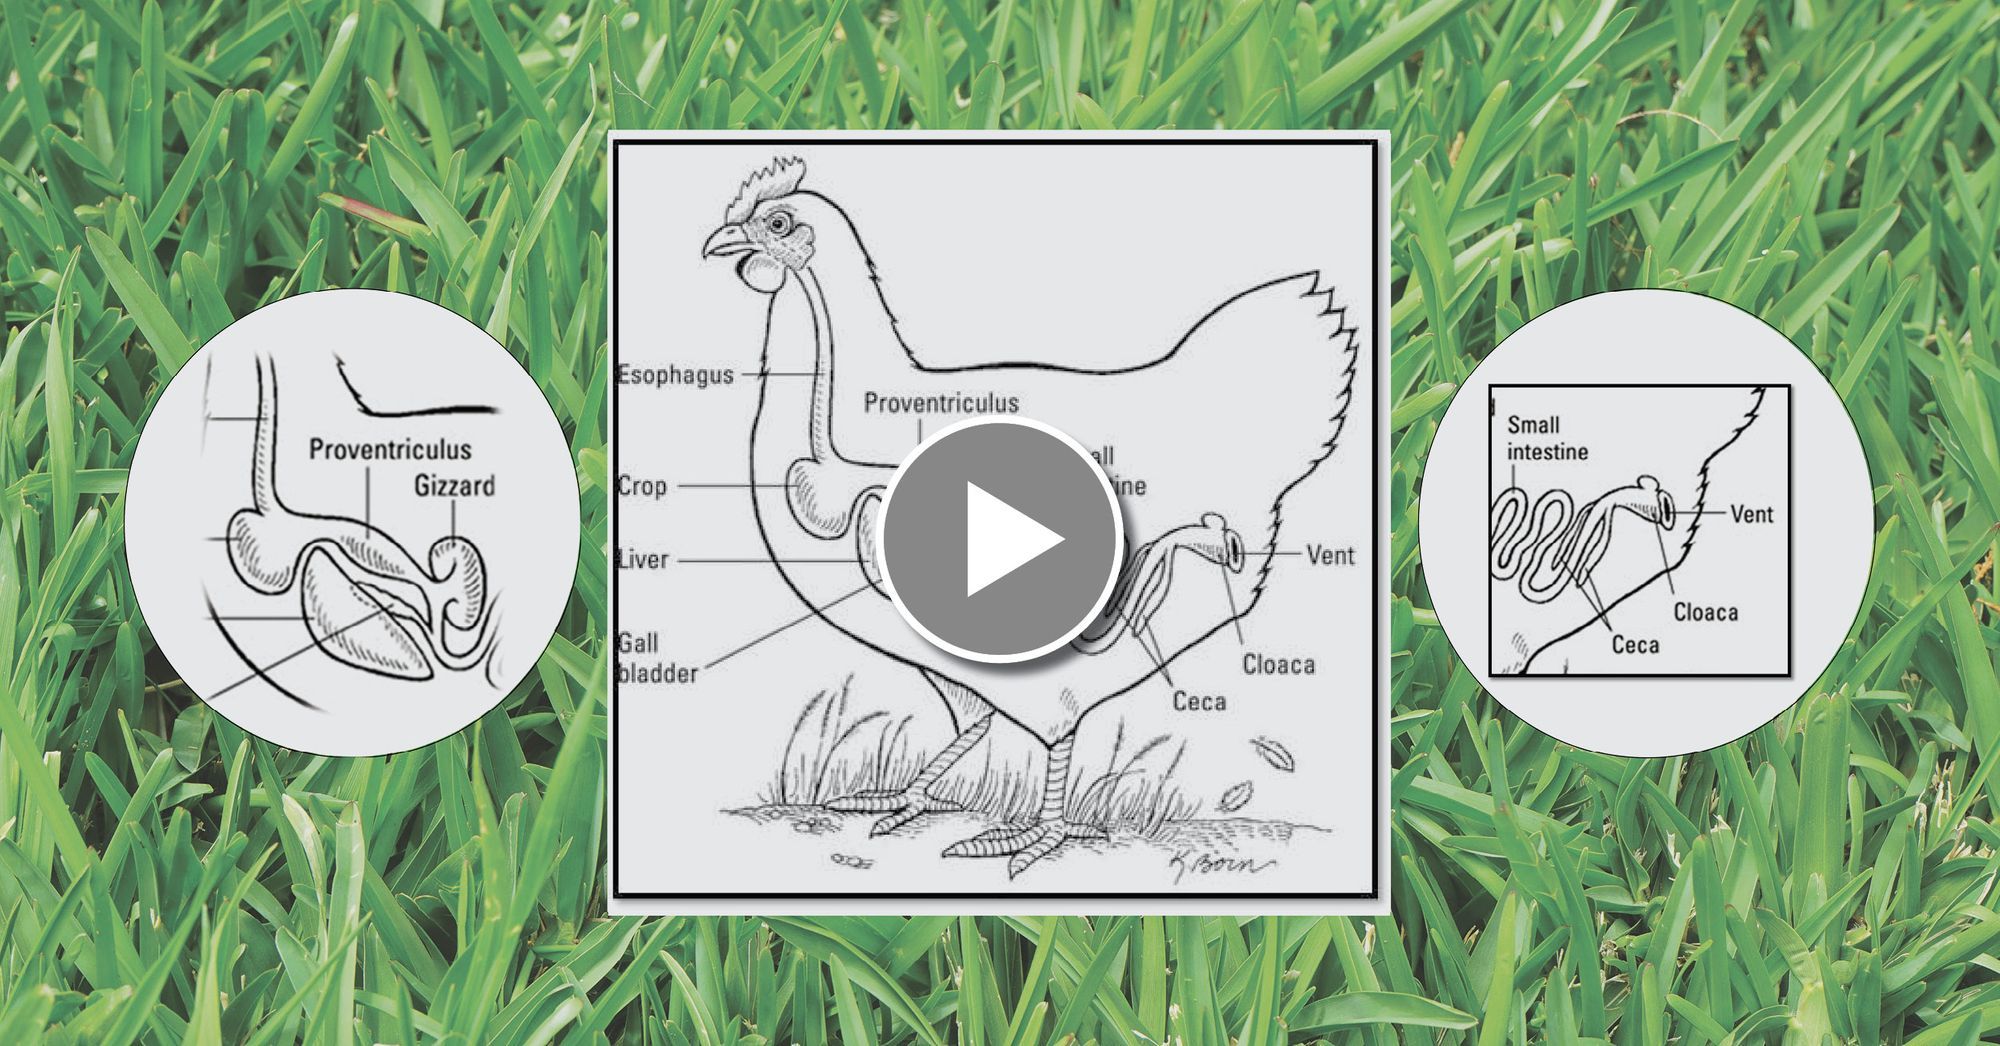 The Poultry Digestive Tract